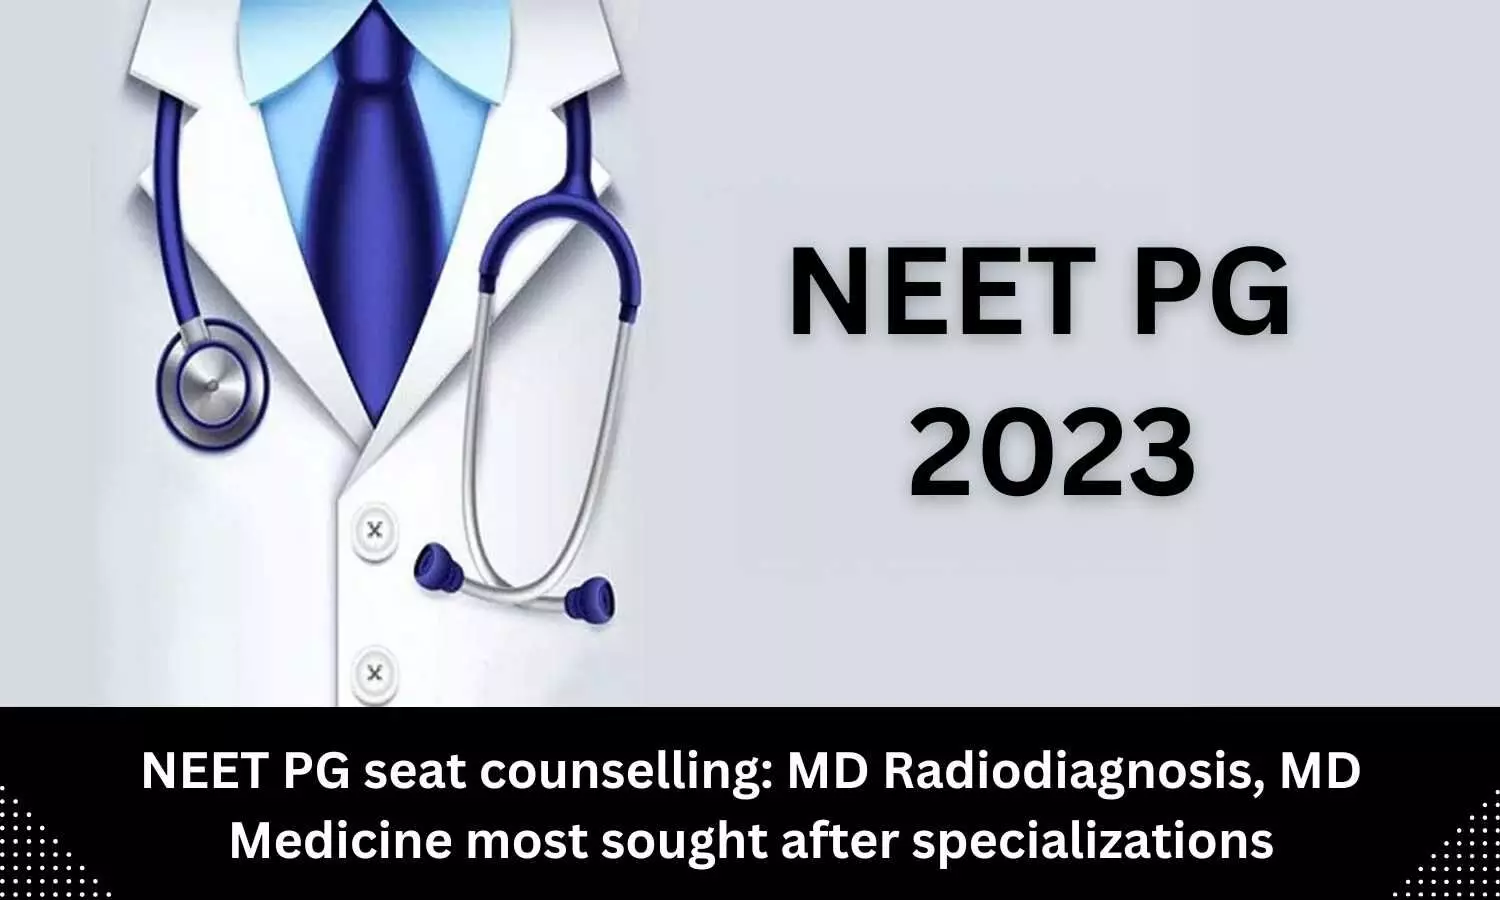 NEET PG seat counselling: MD Medicine, MD Radiodiagnosis most sought after specializations